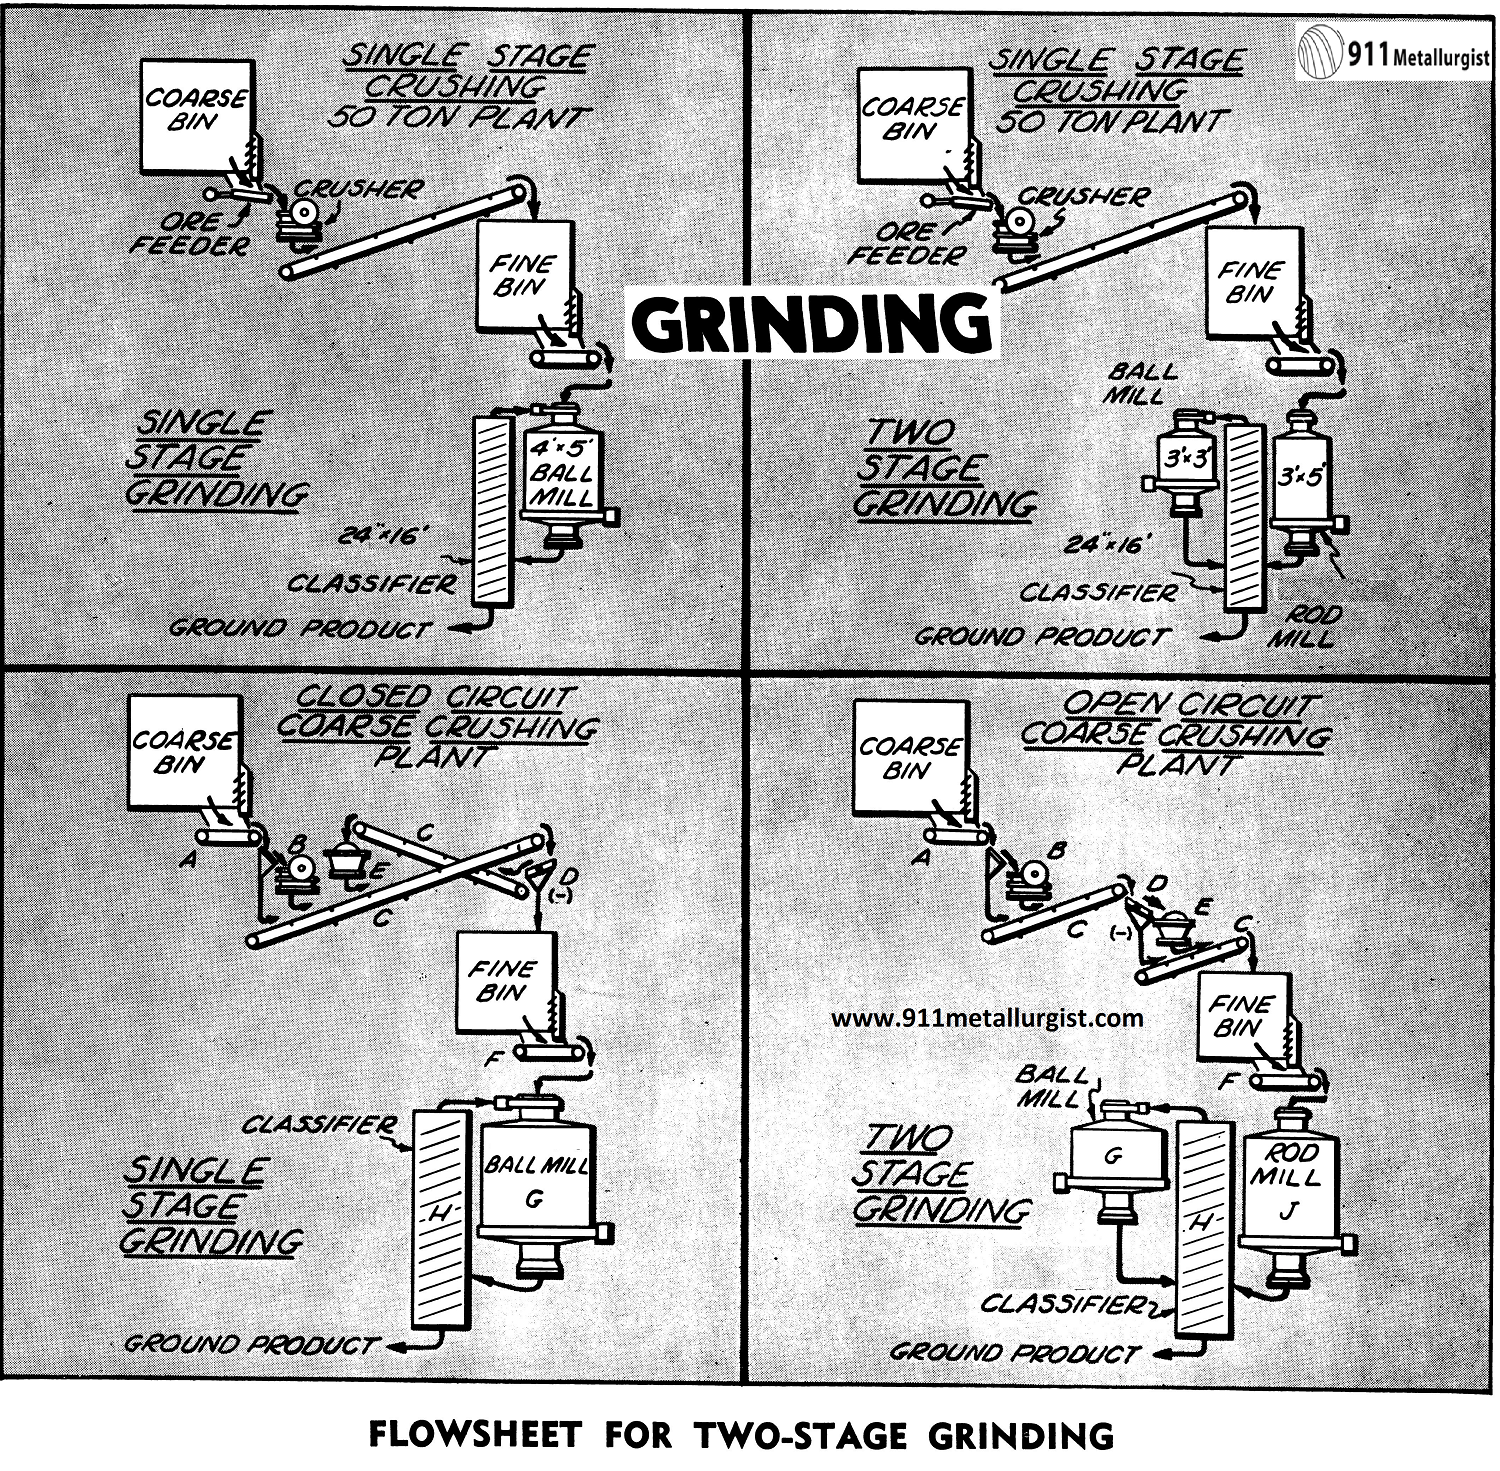 Flowsheet for Two-Stage Grinding